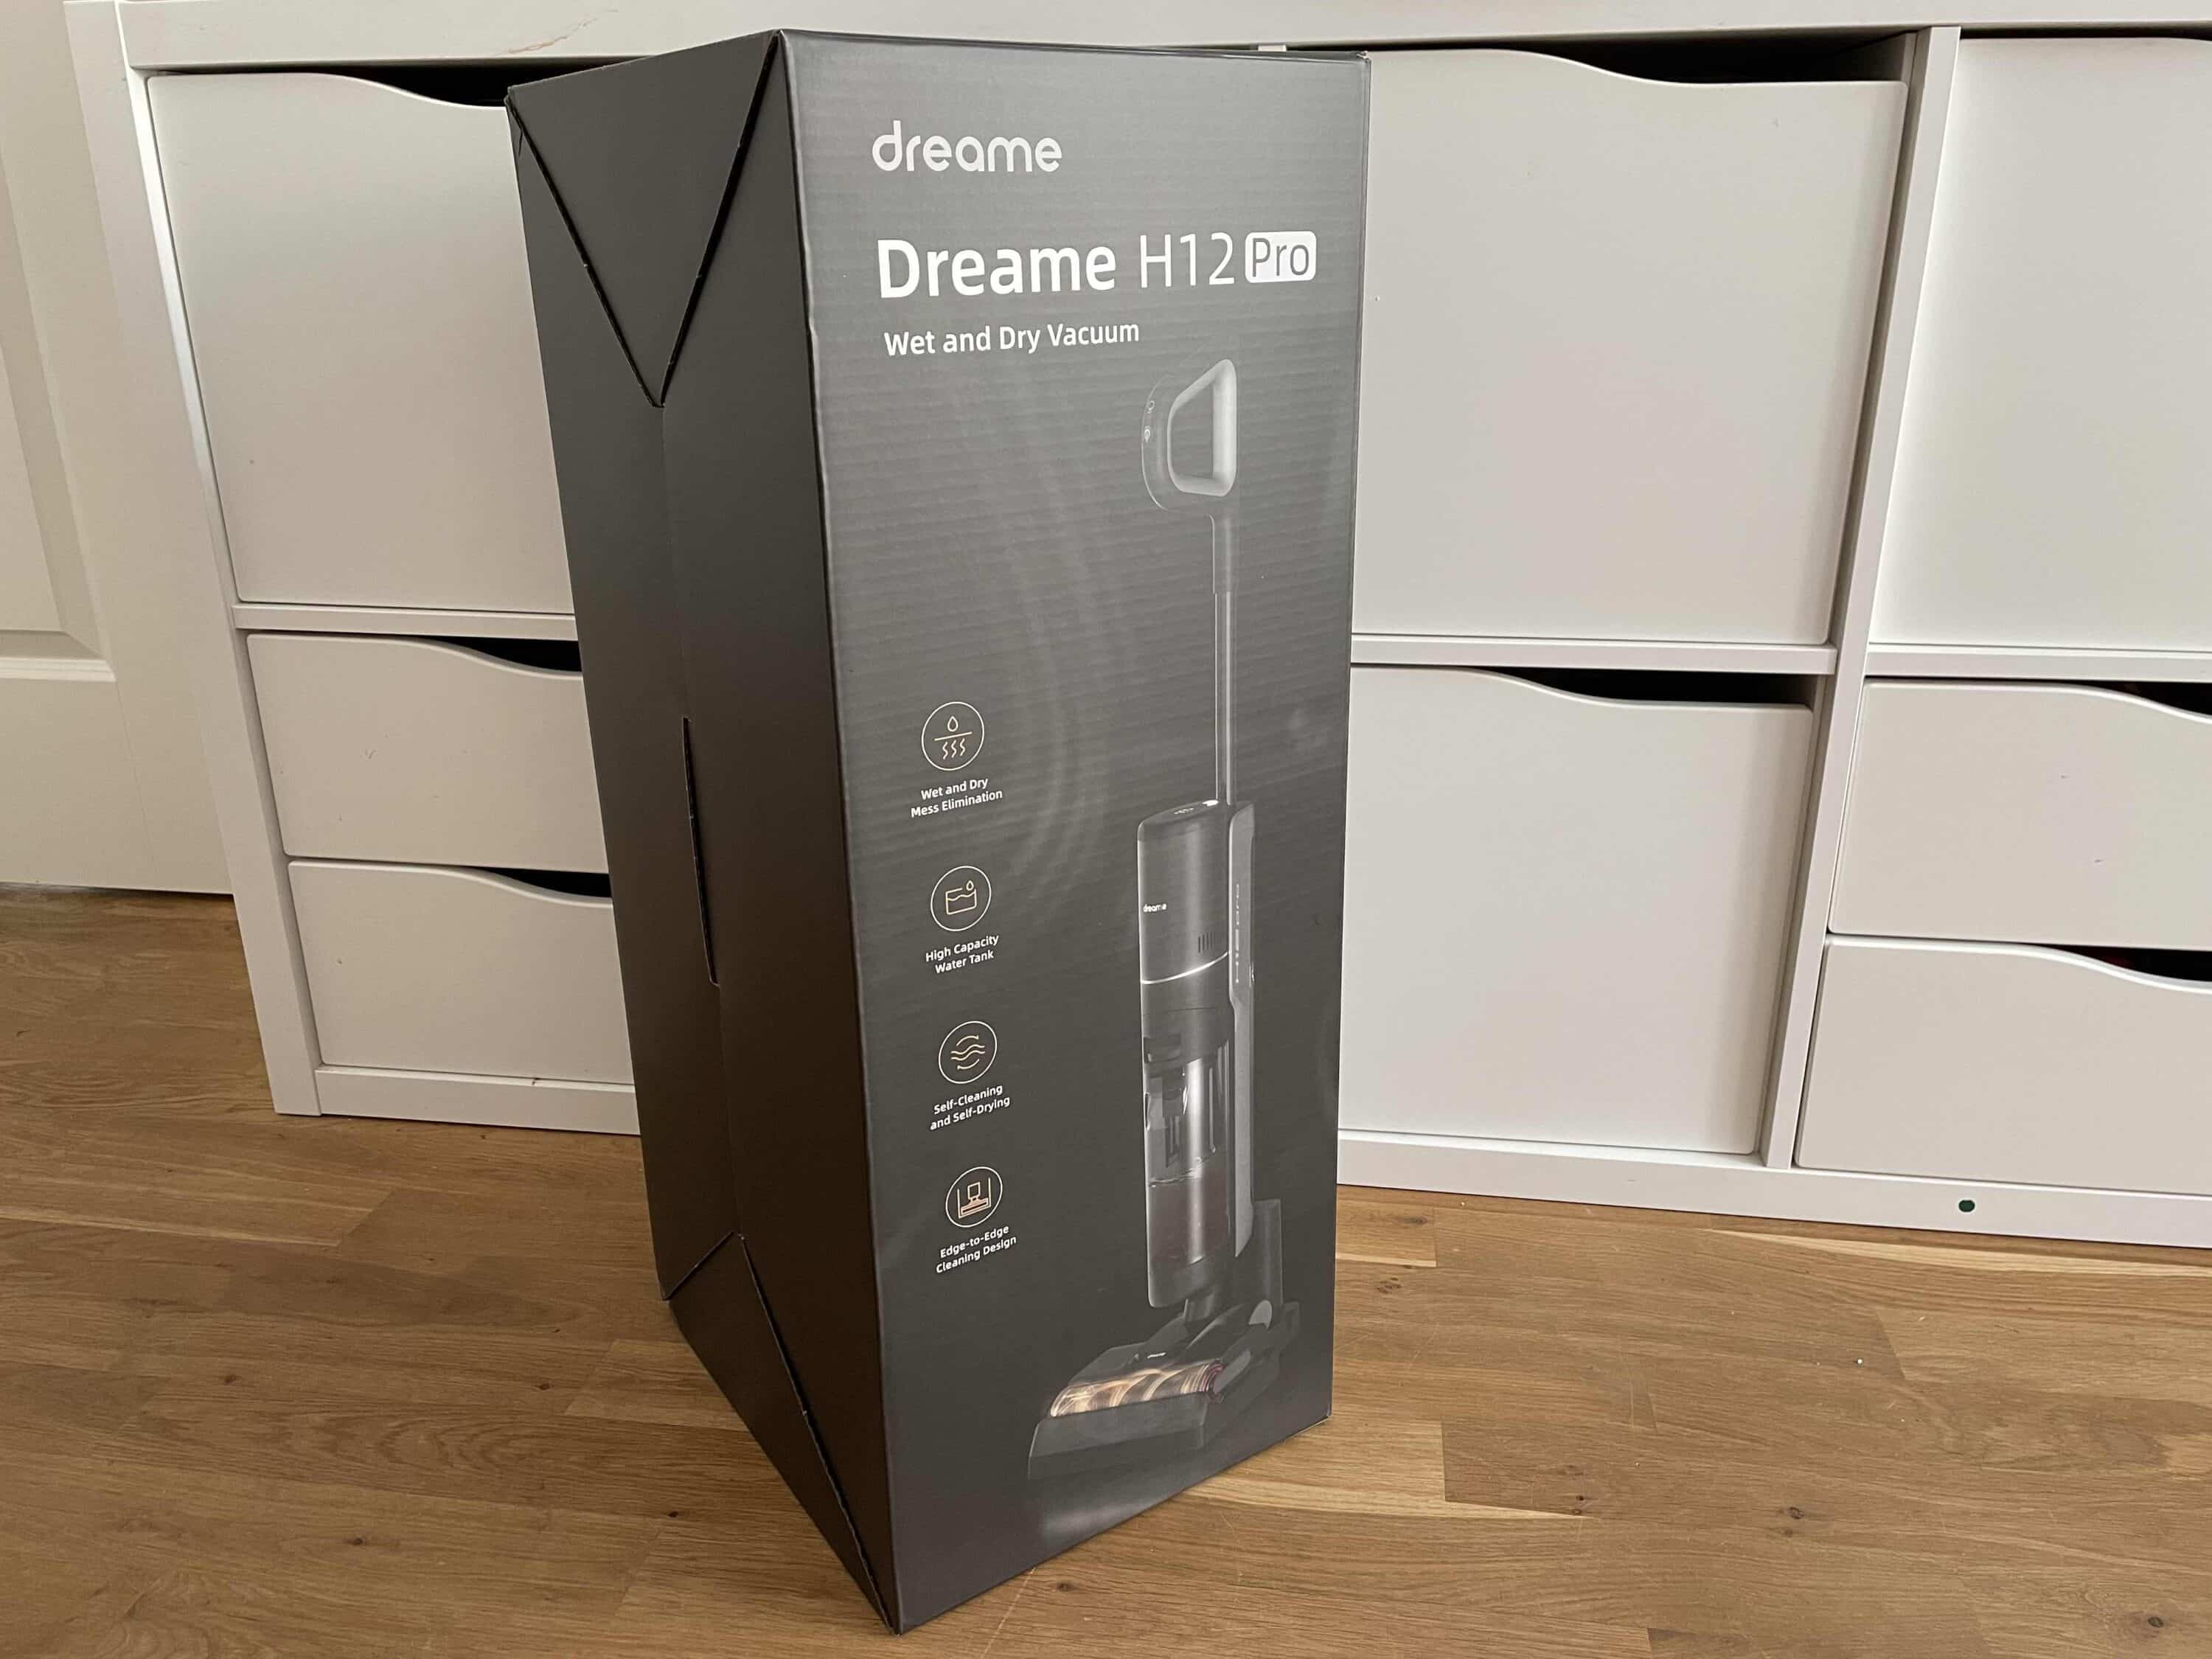 Dreame H12 Pro Review & Test✓ Clean edge to edge, hot air drying